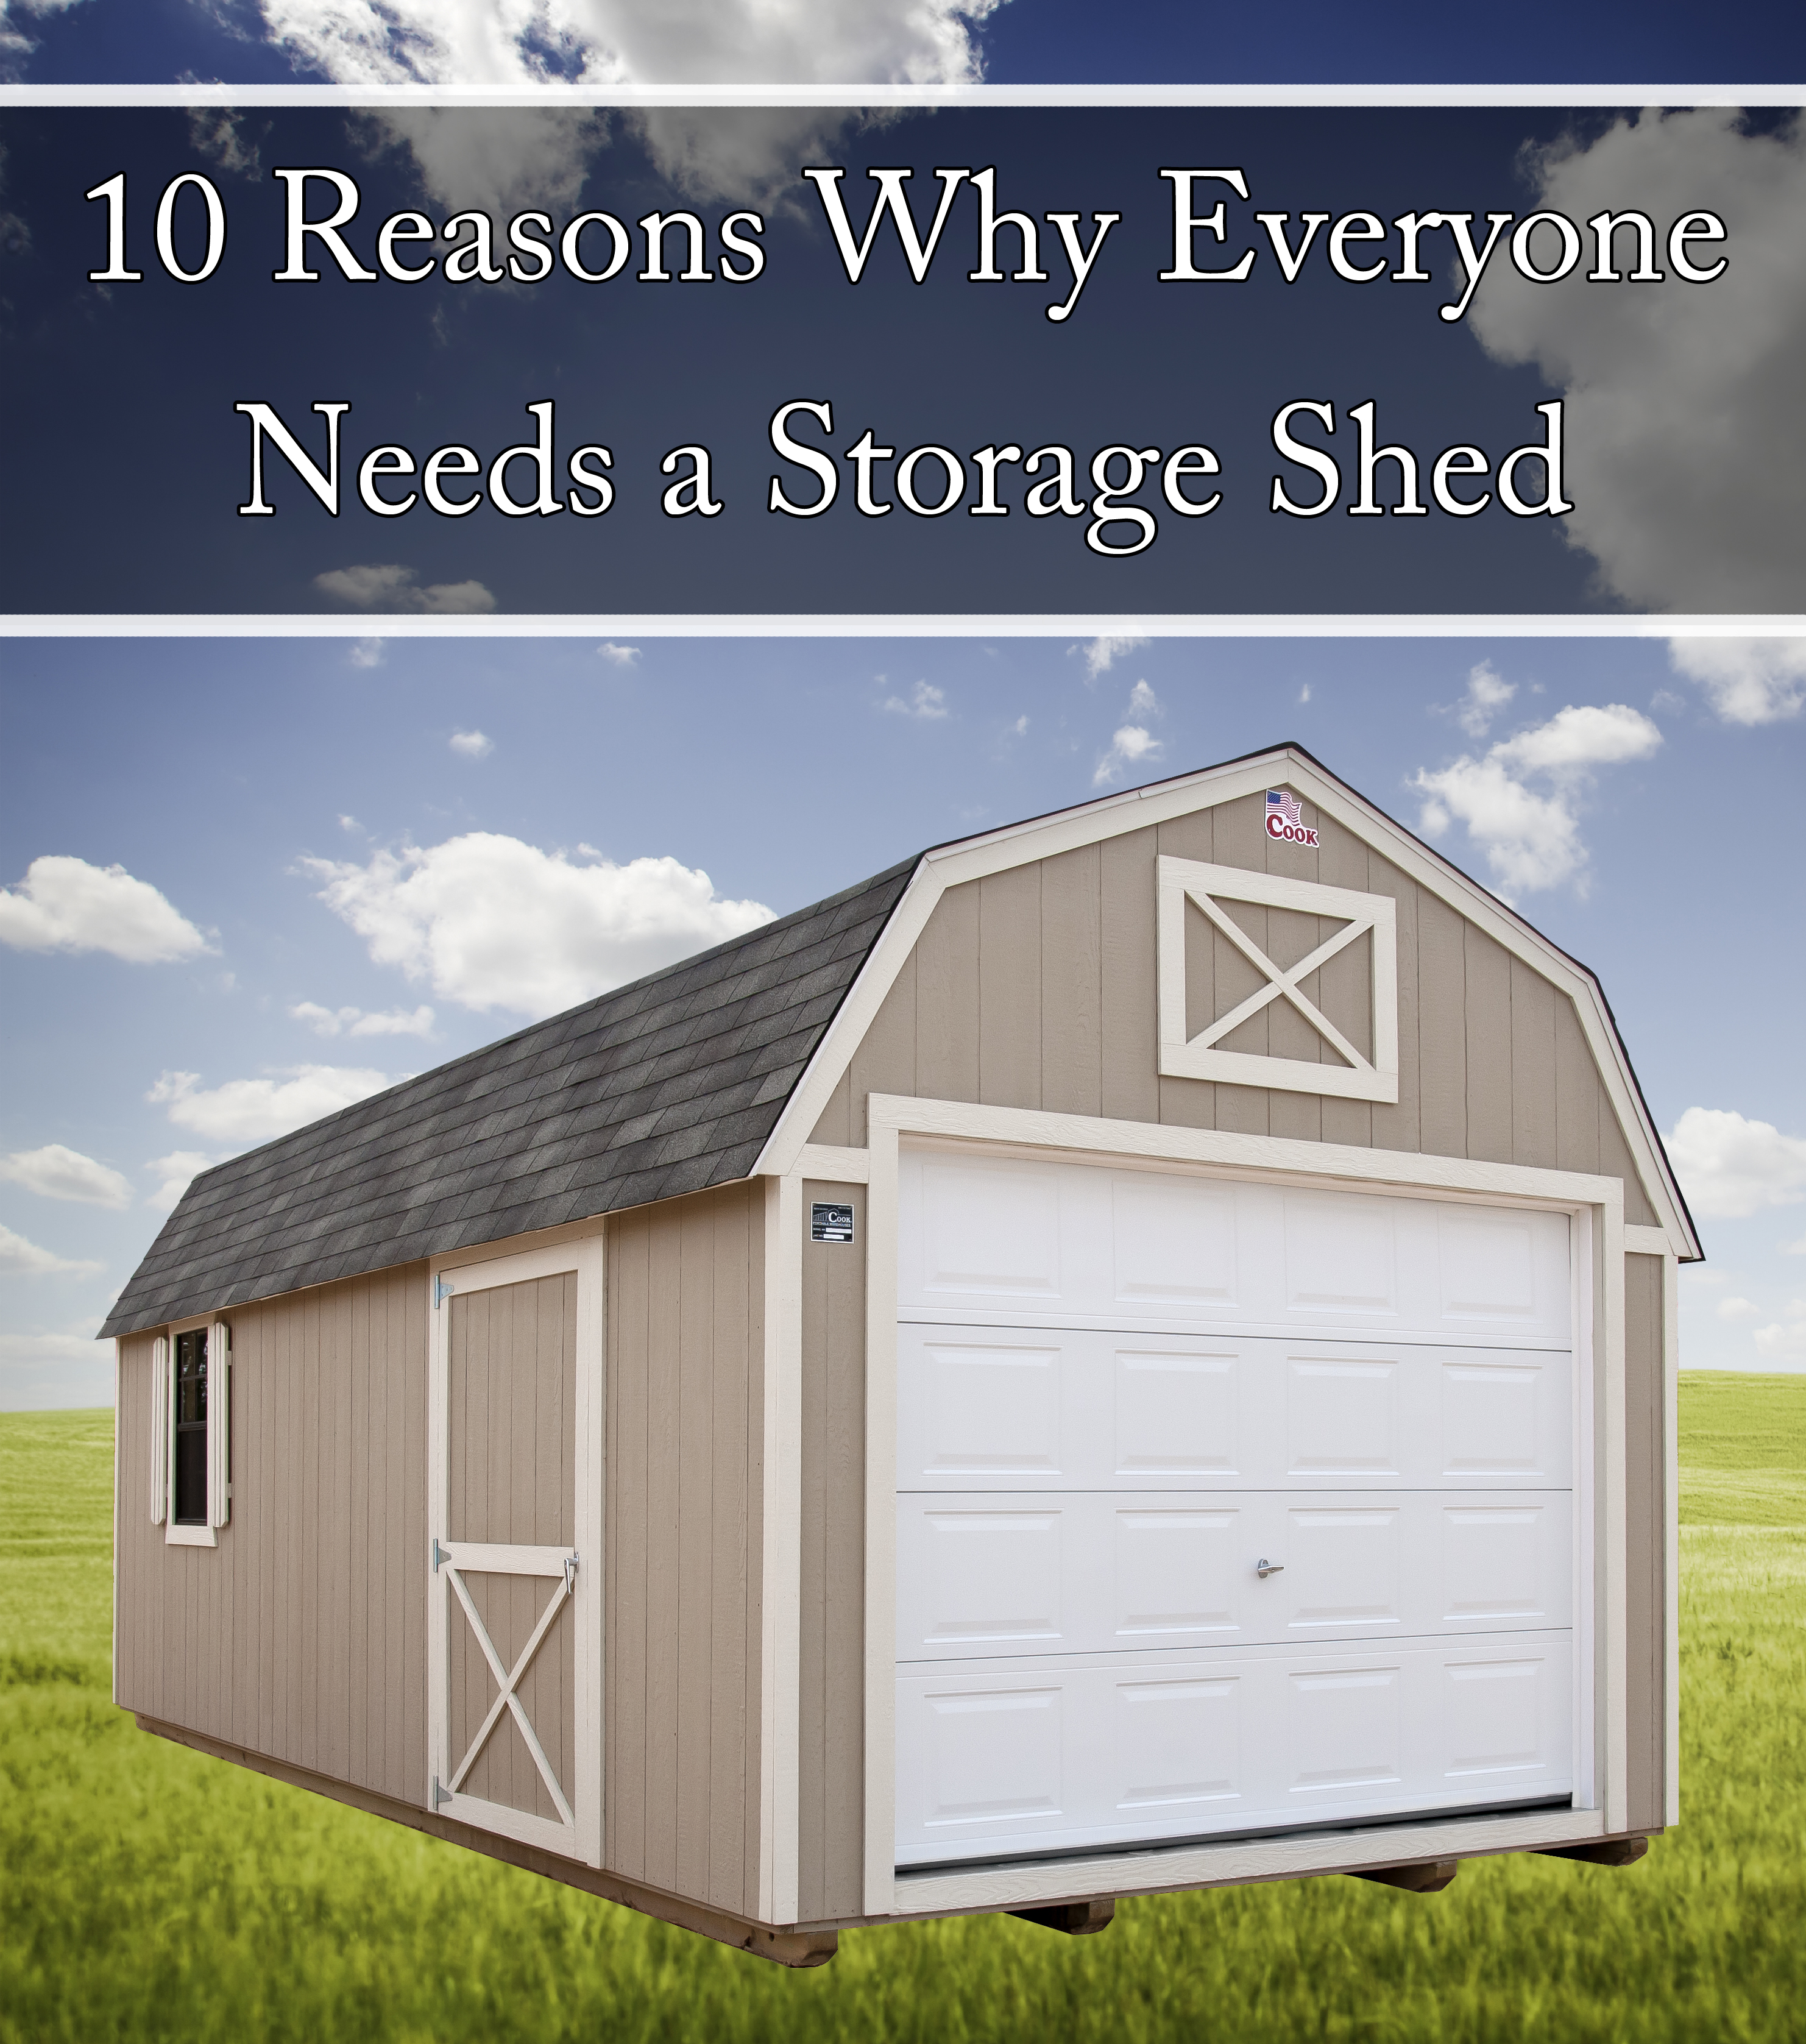 10_Reasons_Why_Everyone_Needs_a_Storage_Shed_Cook_Portable_Warehouses